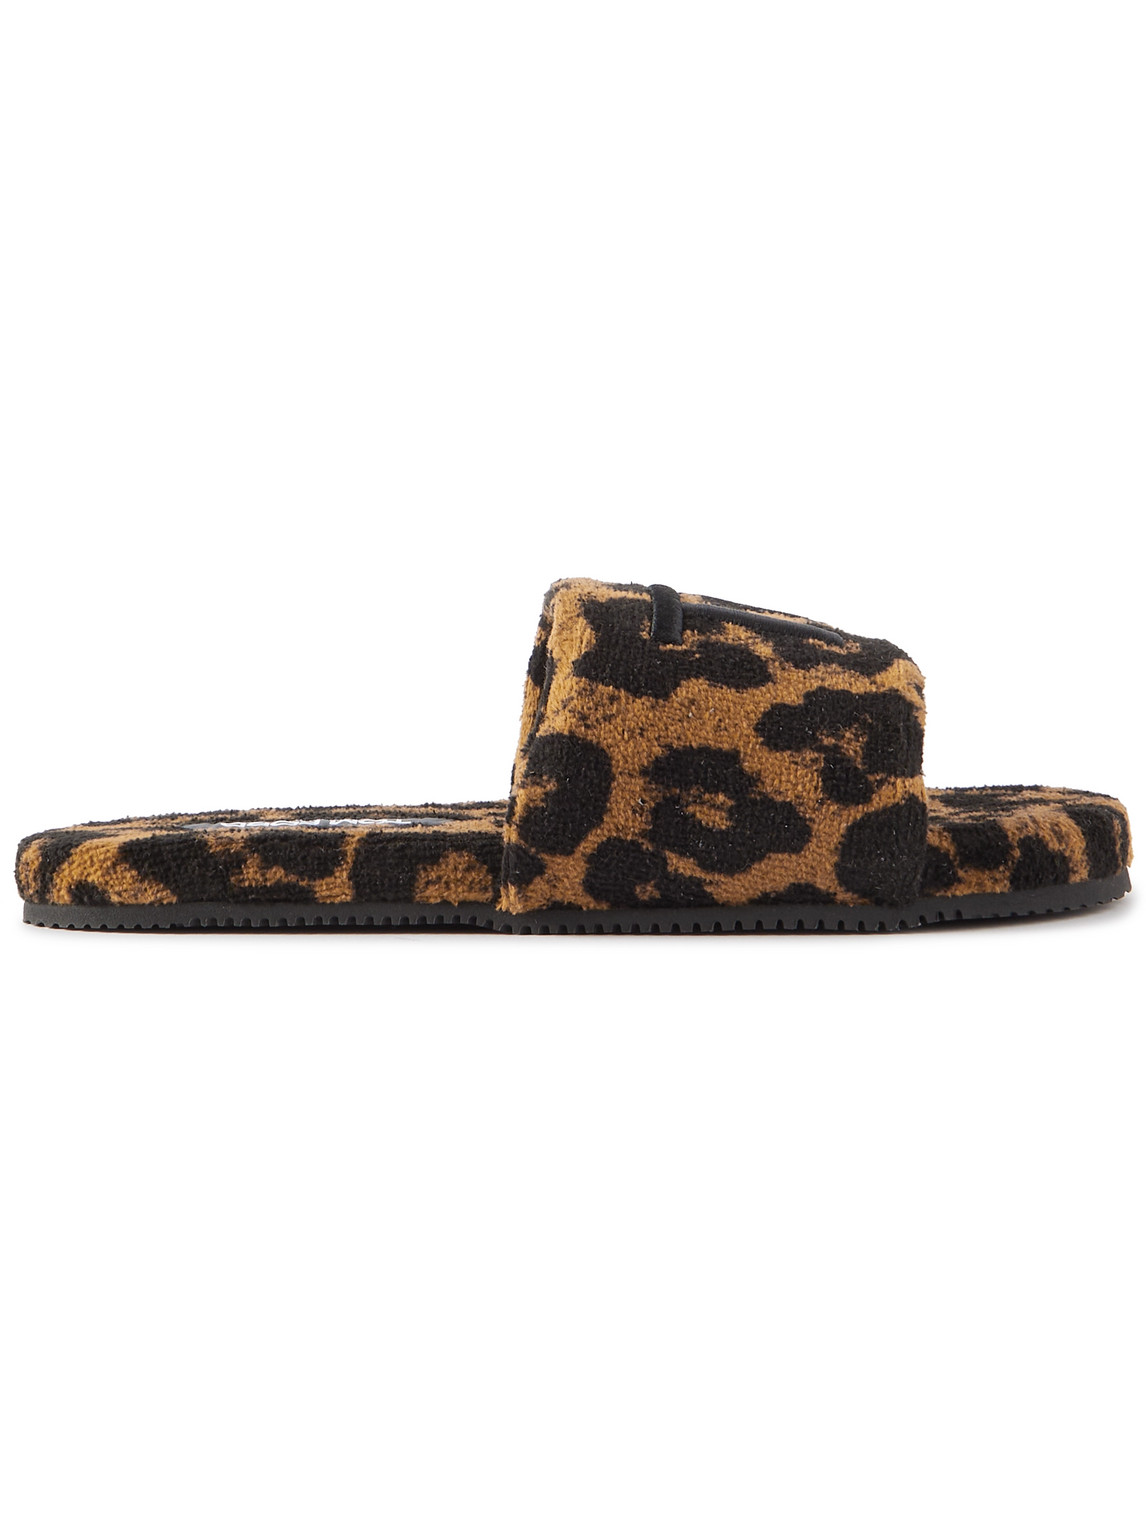 TOM FORD HARRISON LOGO-EMBROIDERED LEOPARD-PRINT TERRY SANDALS